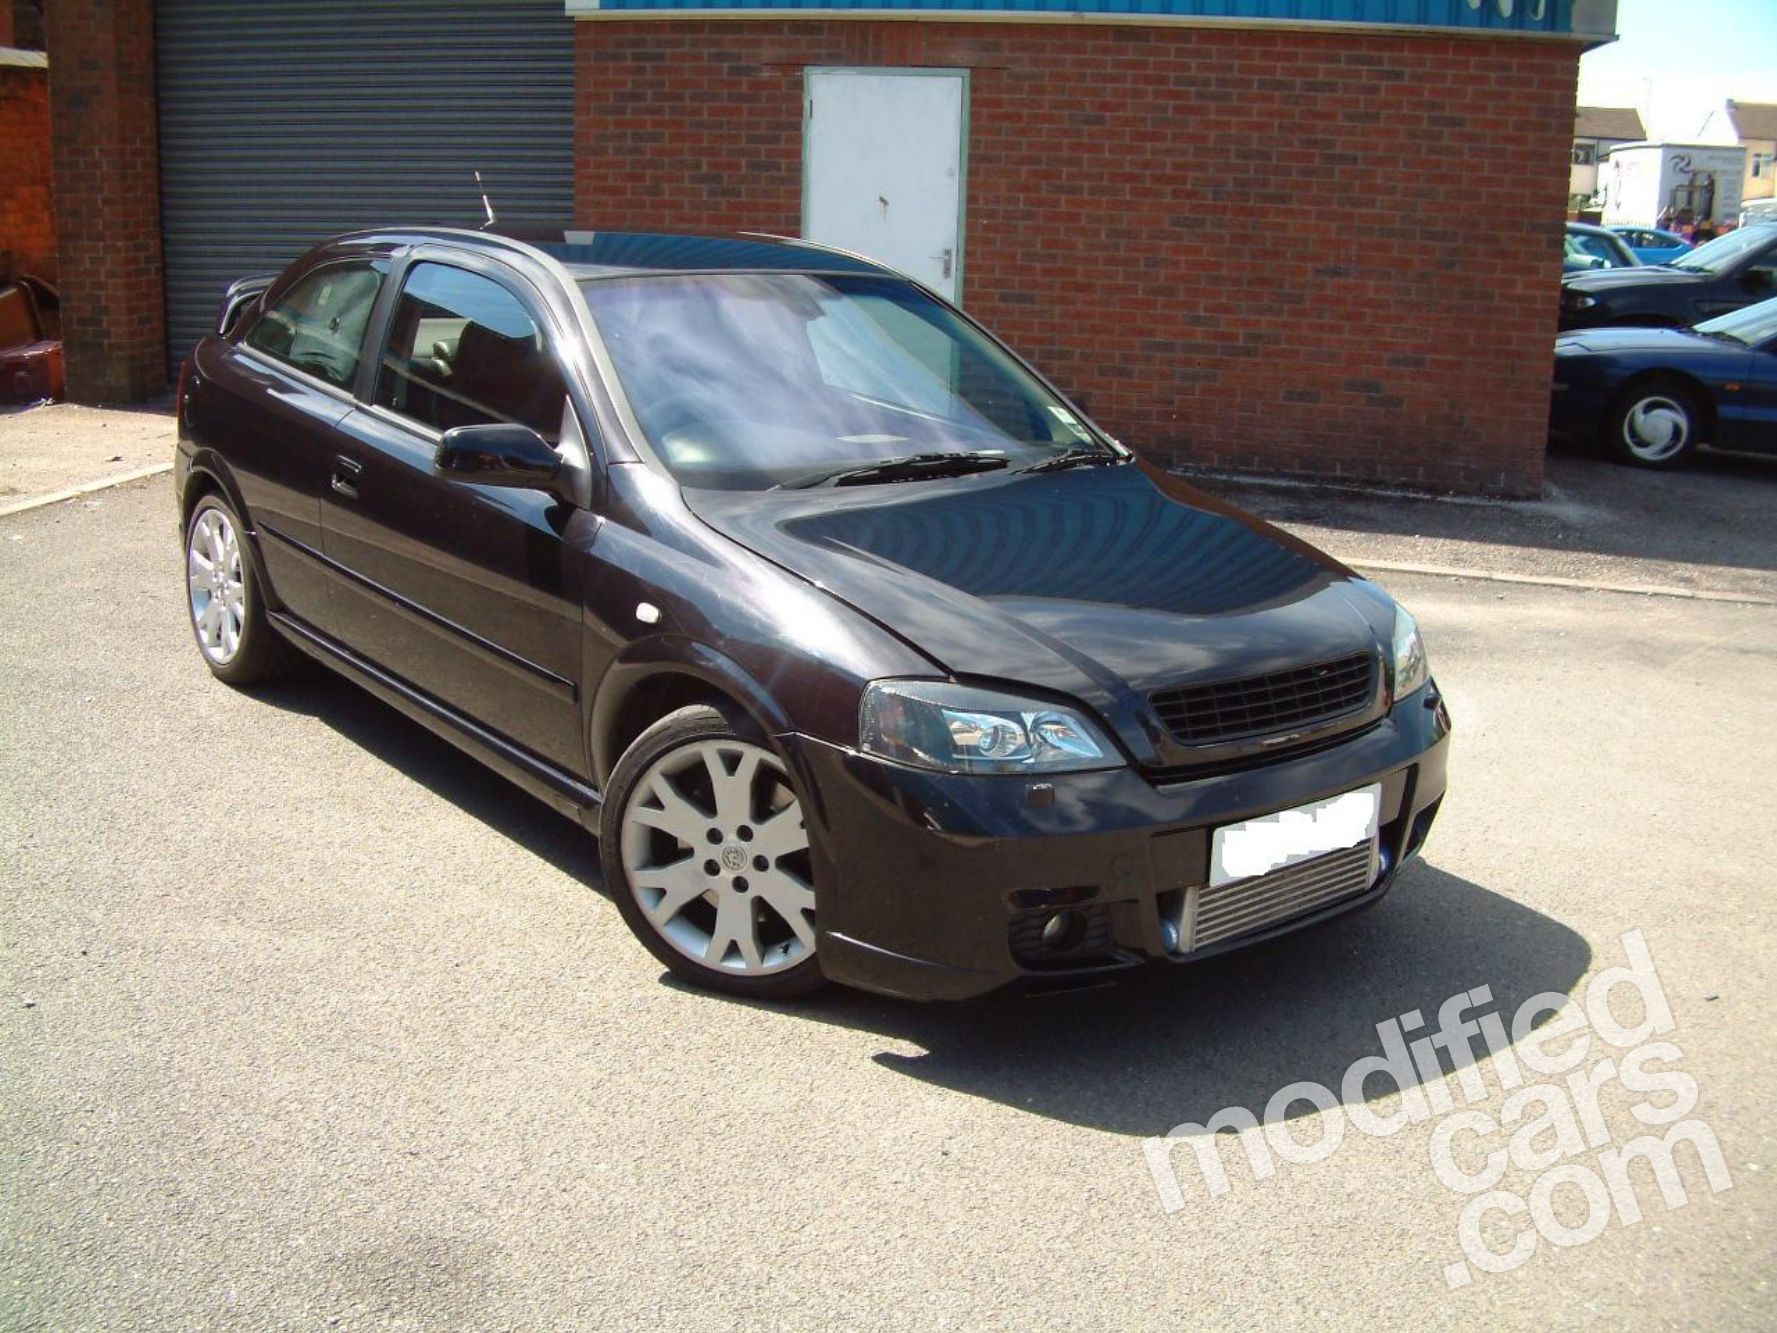 Chevrolet Astra GSi 2.0 16V (2005) - pictures, information & specs